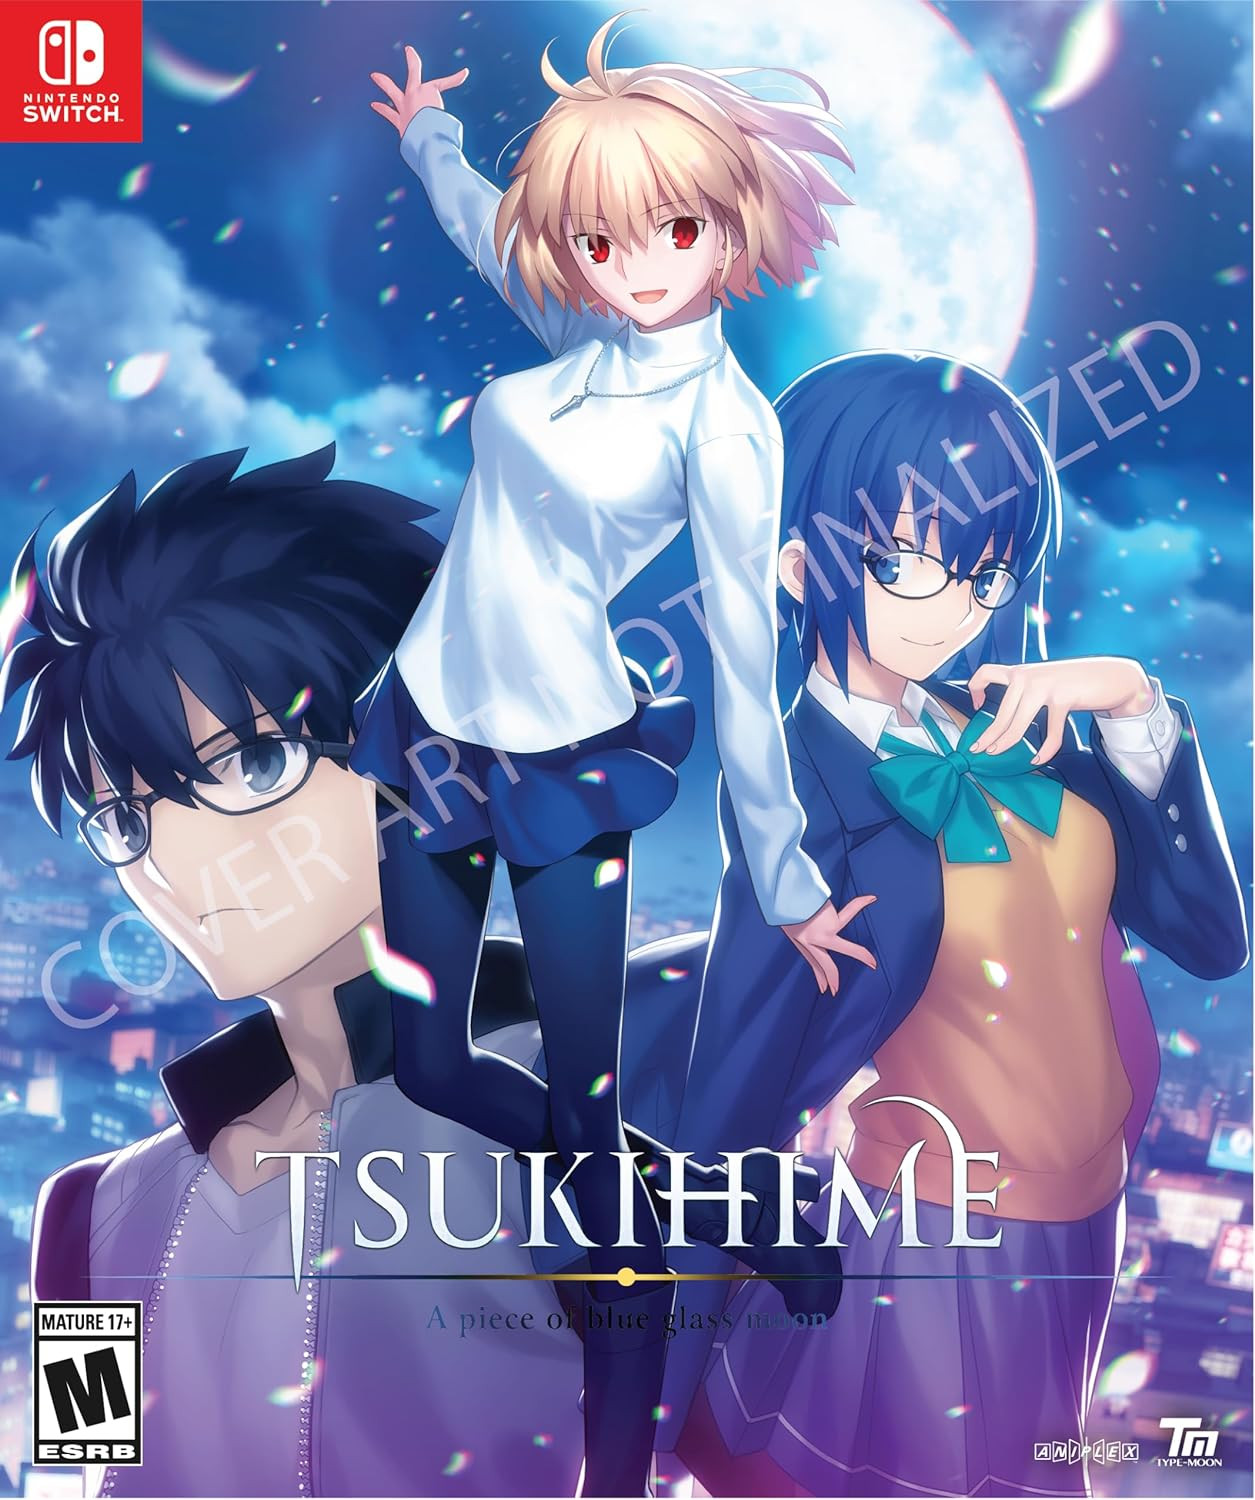 Tsukihime a Piece of Blue Glass Moon Limited Edition